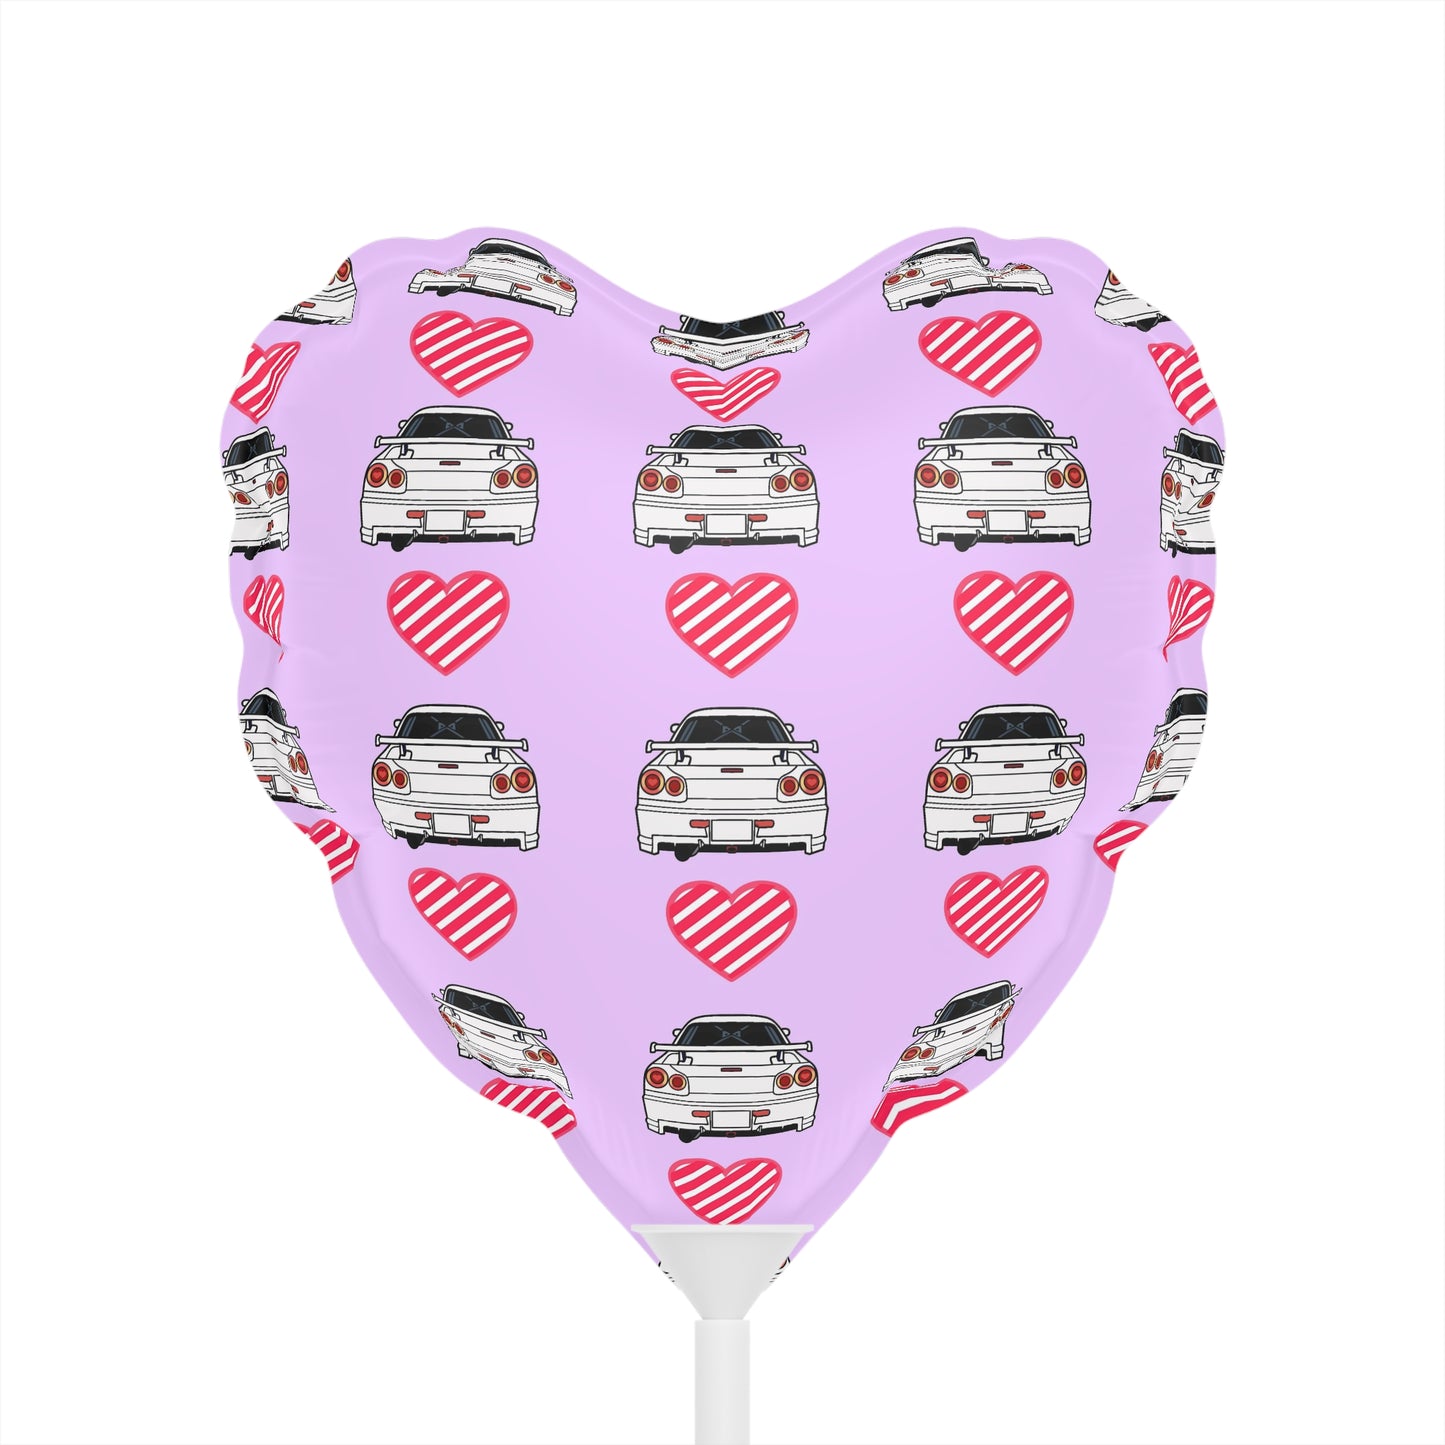 GTR Balloons (Round and Heart-shaped), 6"